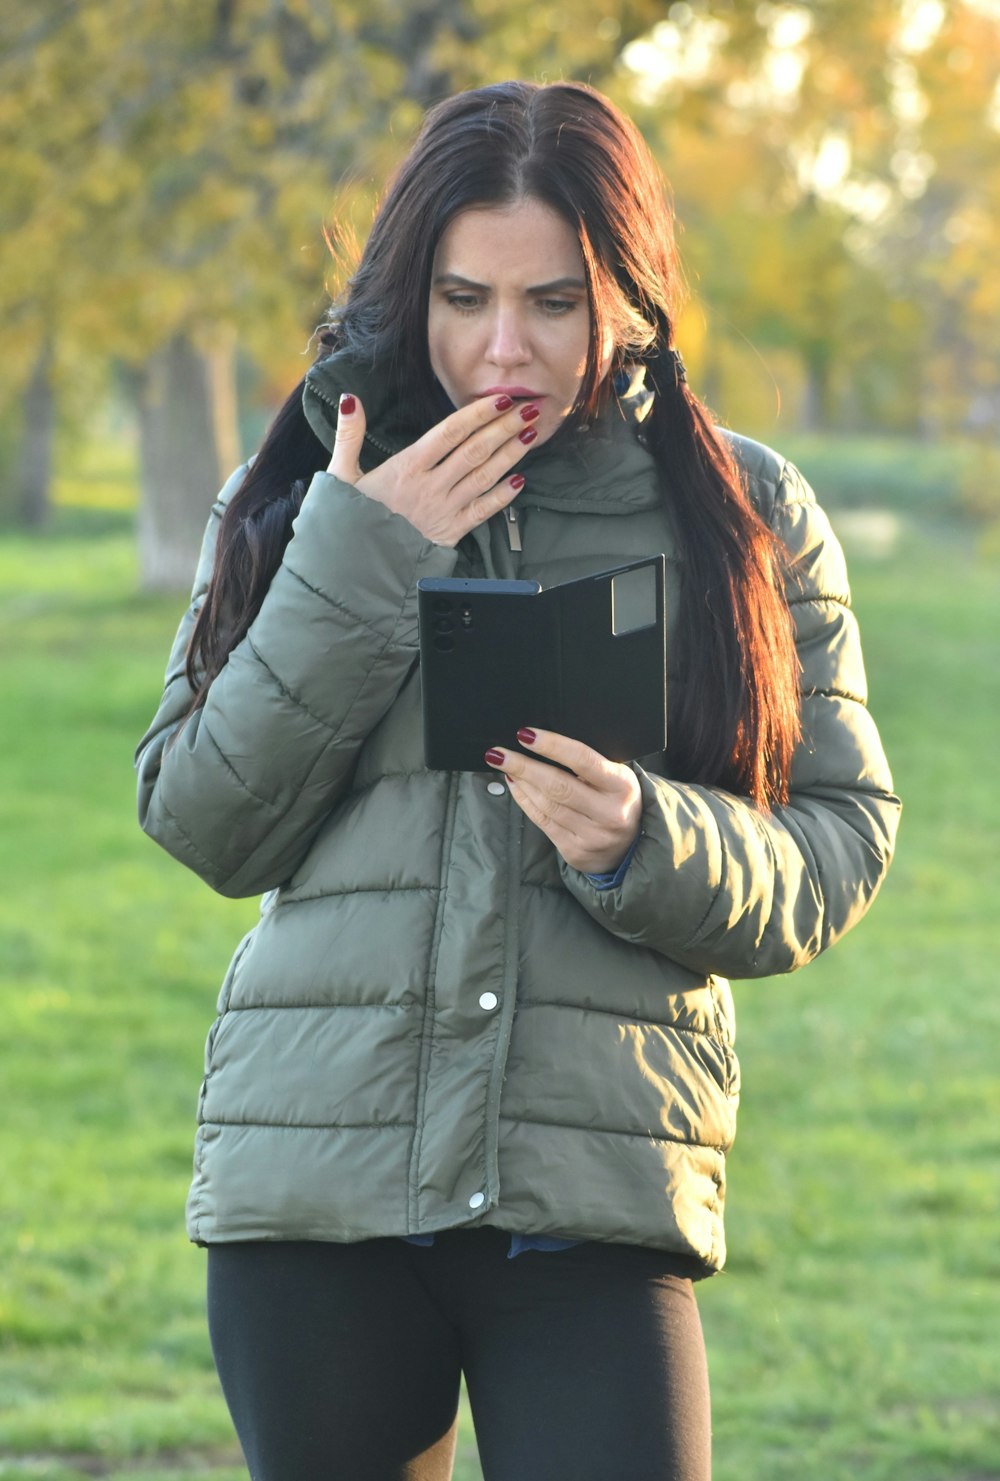 a woman standing in a park holding a tablet